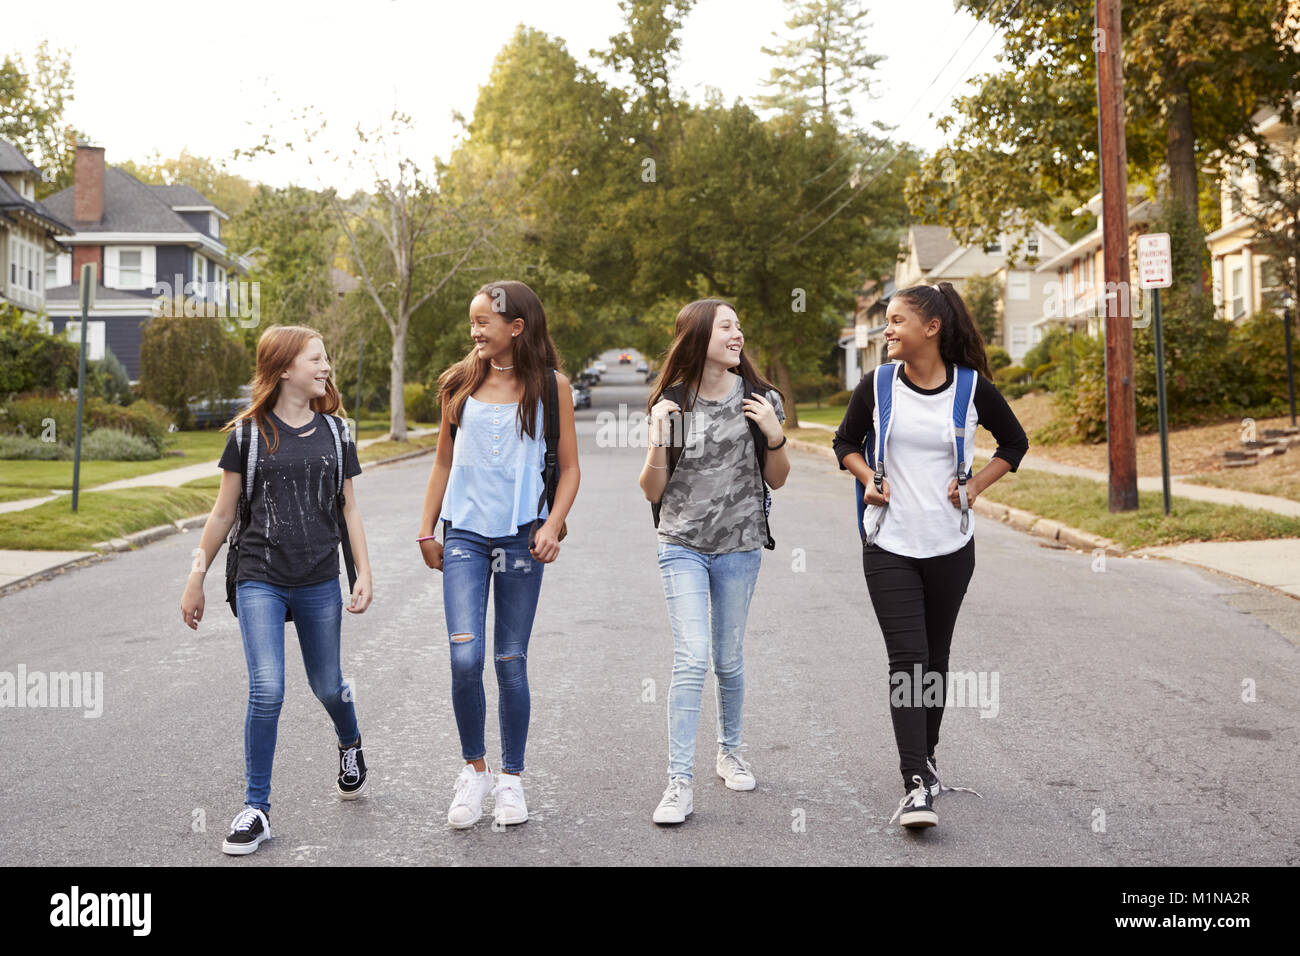 Four young teen girls walking in the road, full length Stock Photo